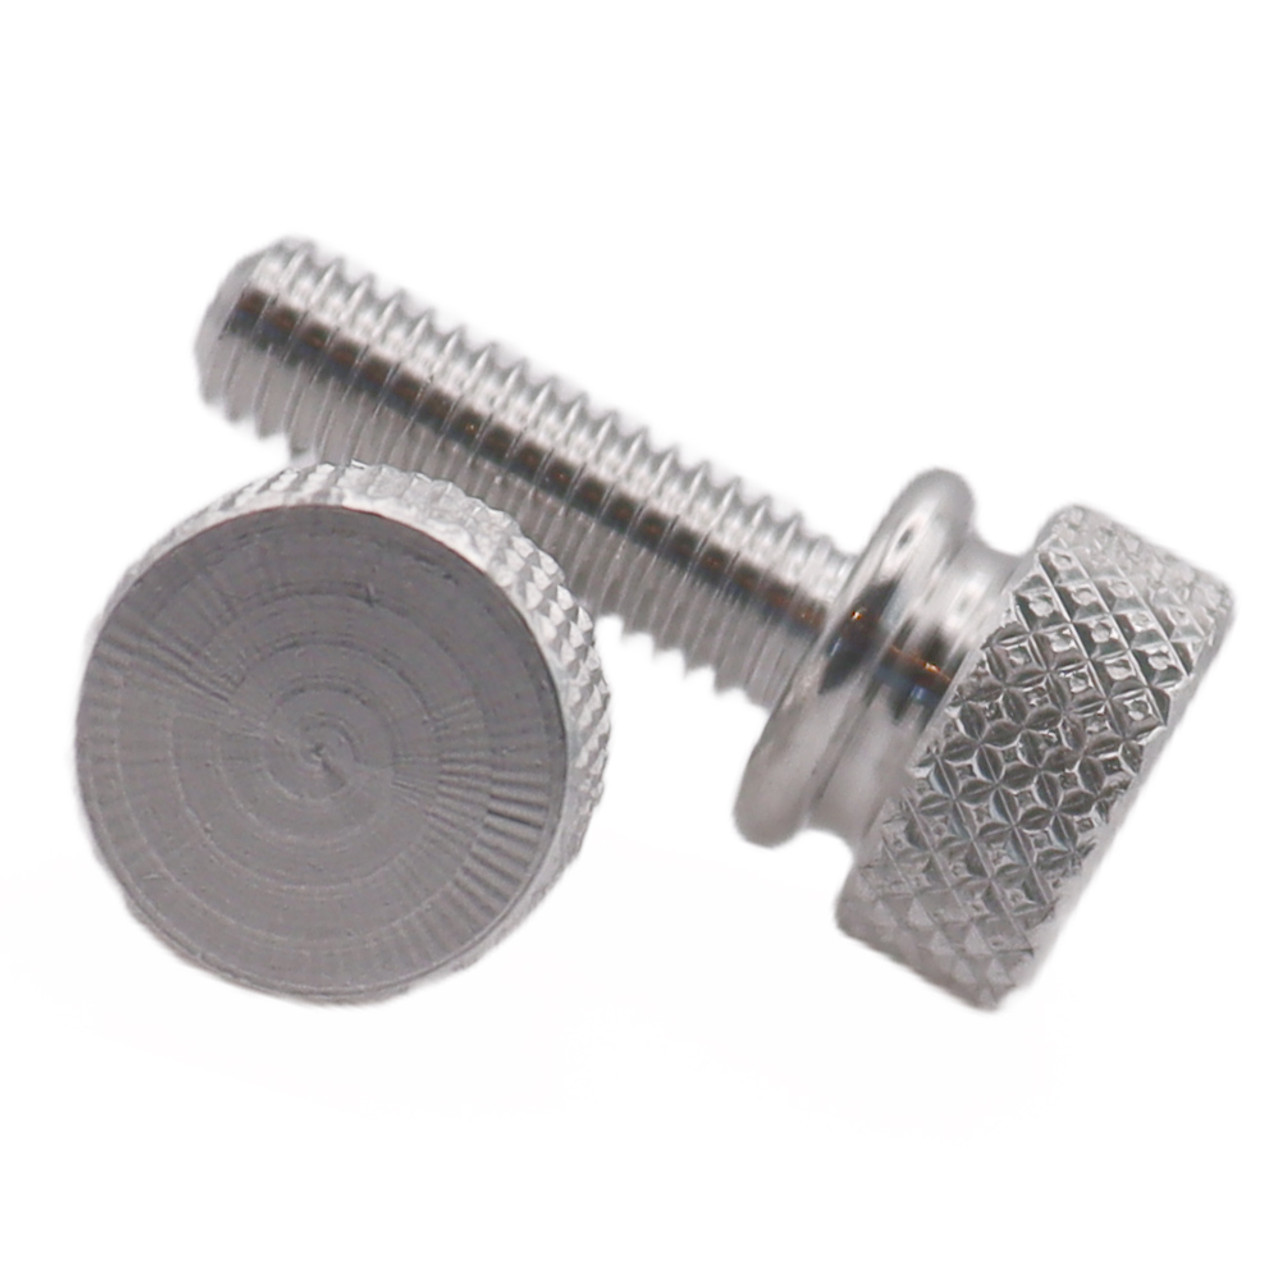 #6-32 x 3/8" (FT) Coarse Thread Knurled Thumb Screw with Washer Face Aluminum